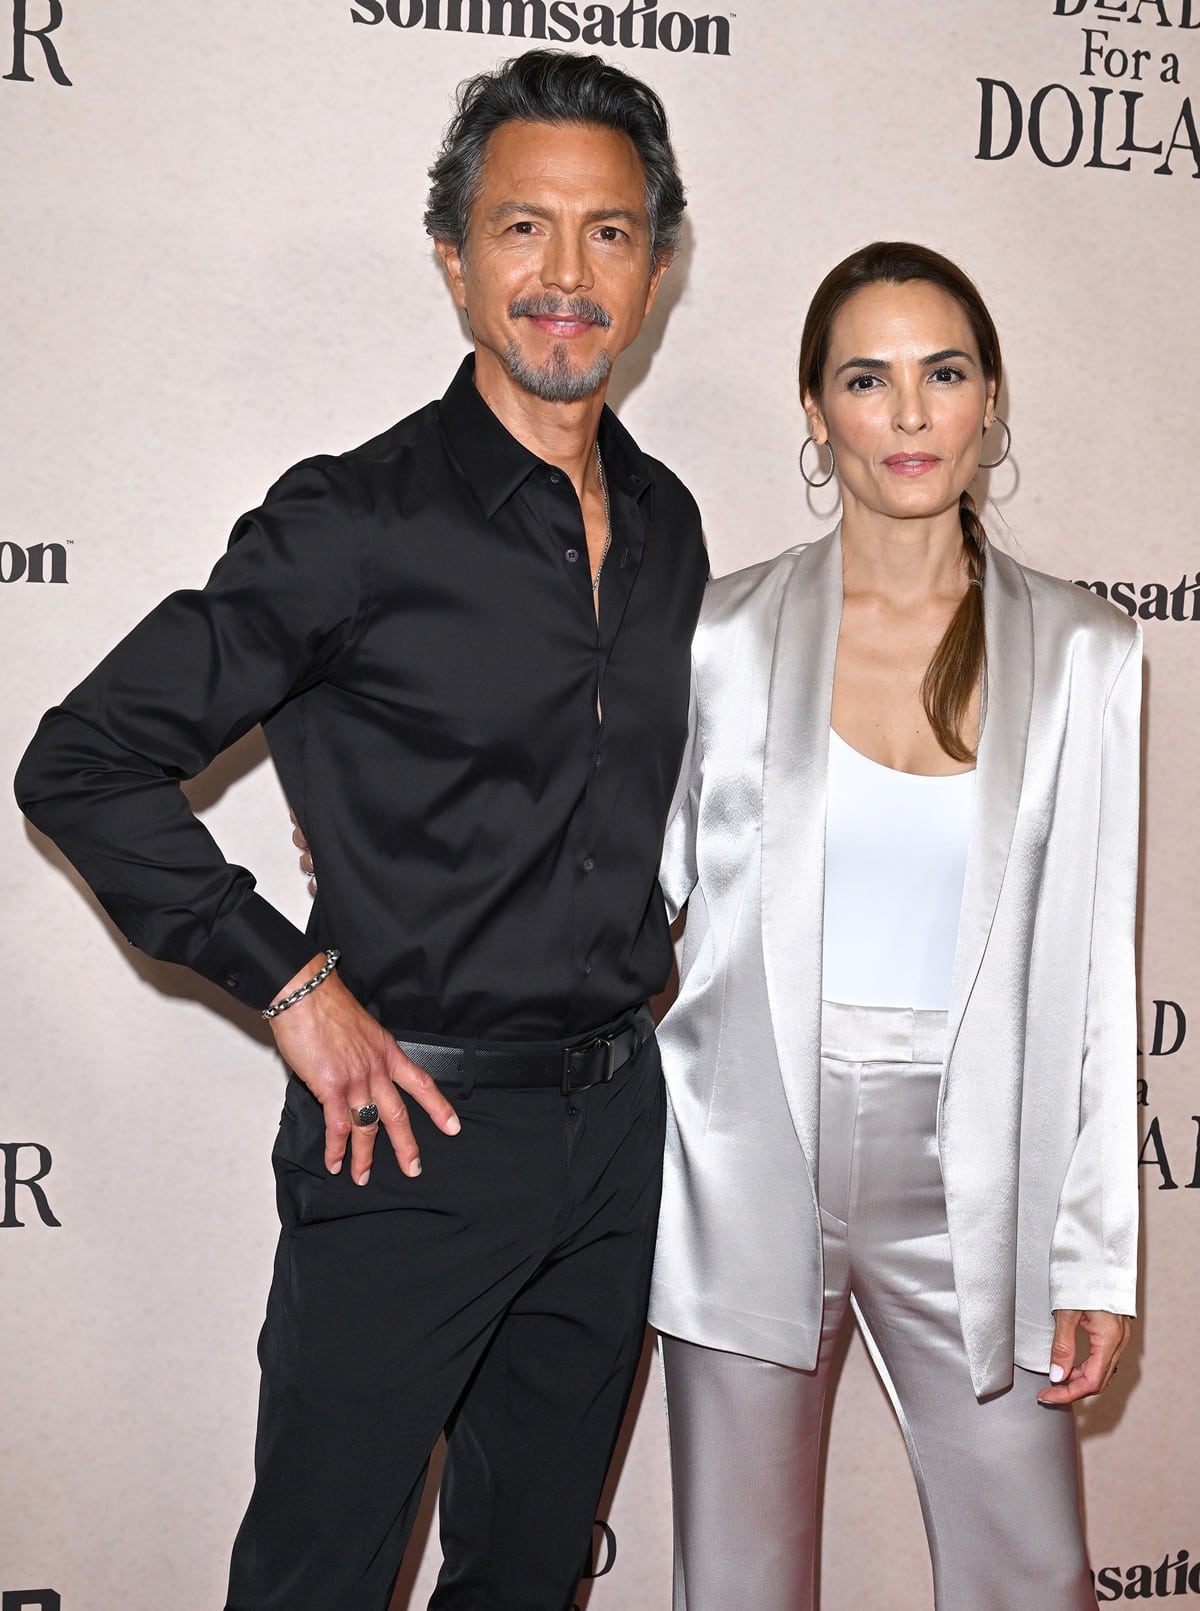 Benjamin Bratt began dating actress Talisa Soto in 2002 after meeting during the filming of Piñero (2001), got married in April 2022, and have two children together, a daughter named Sophia and a son named Mateo